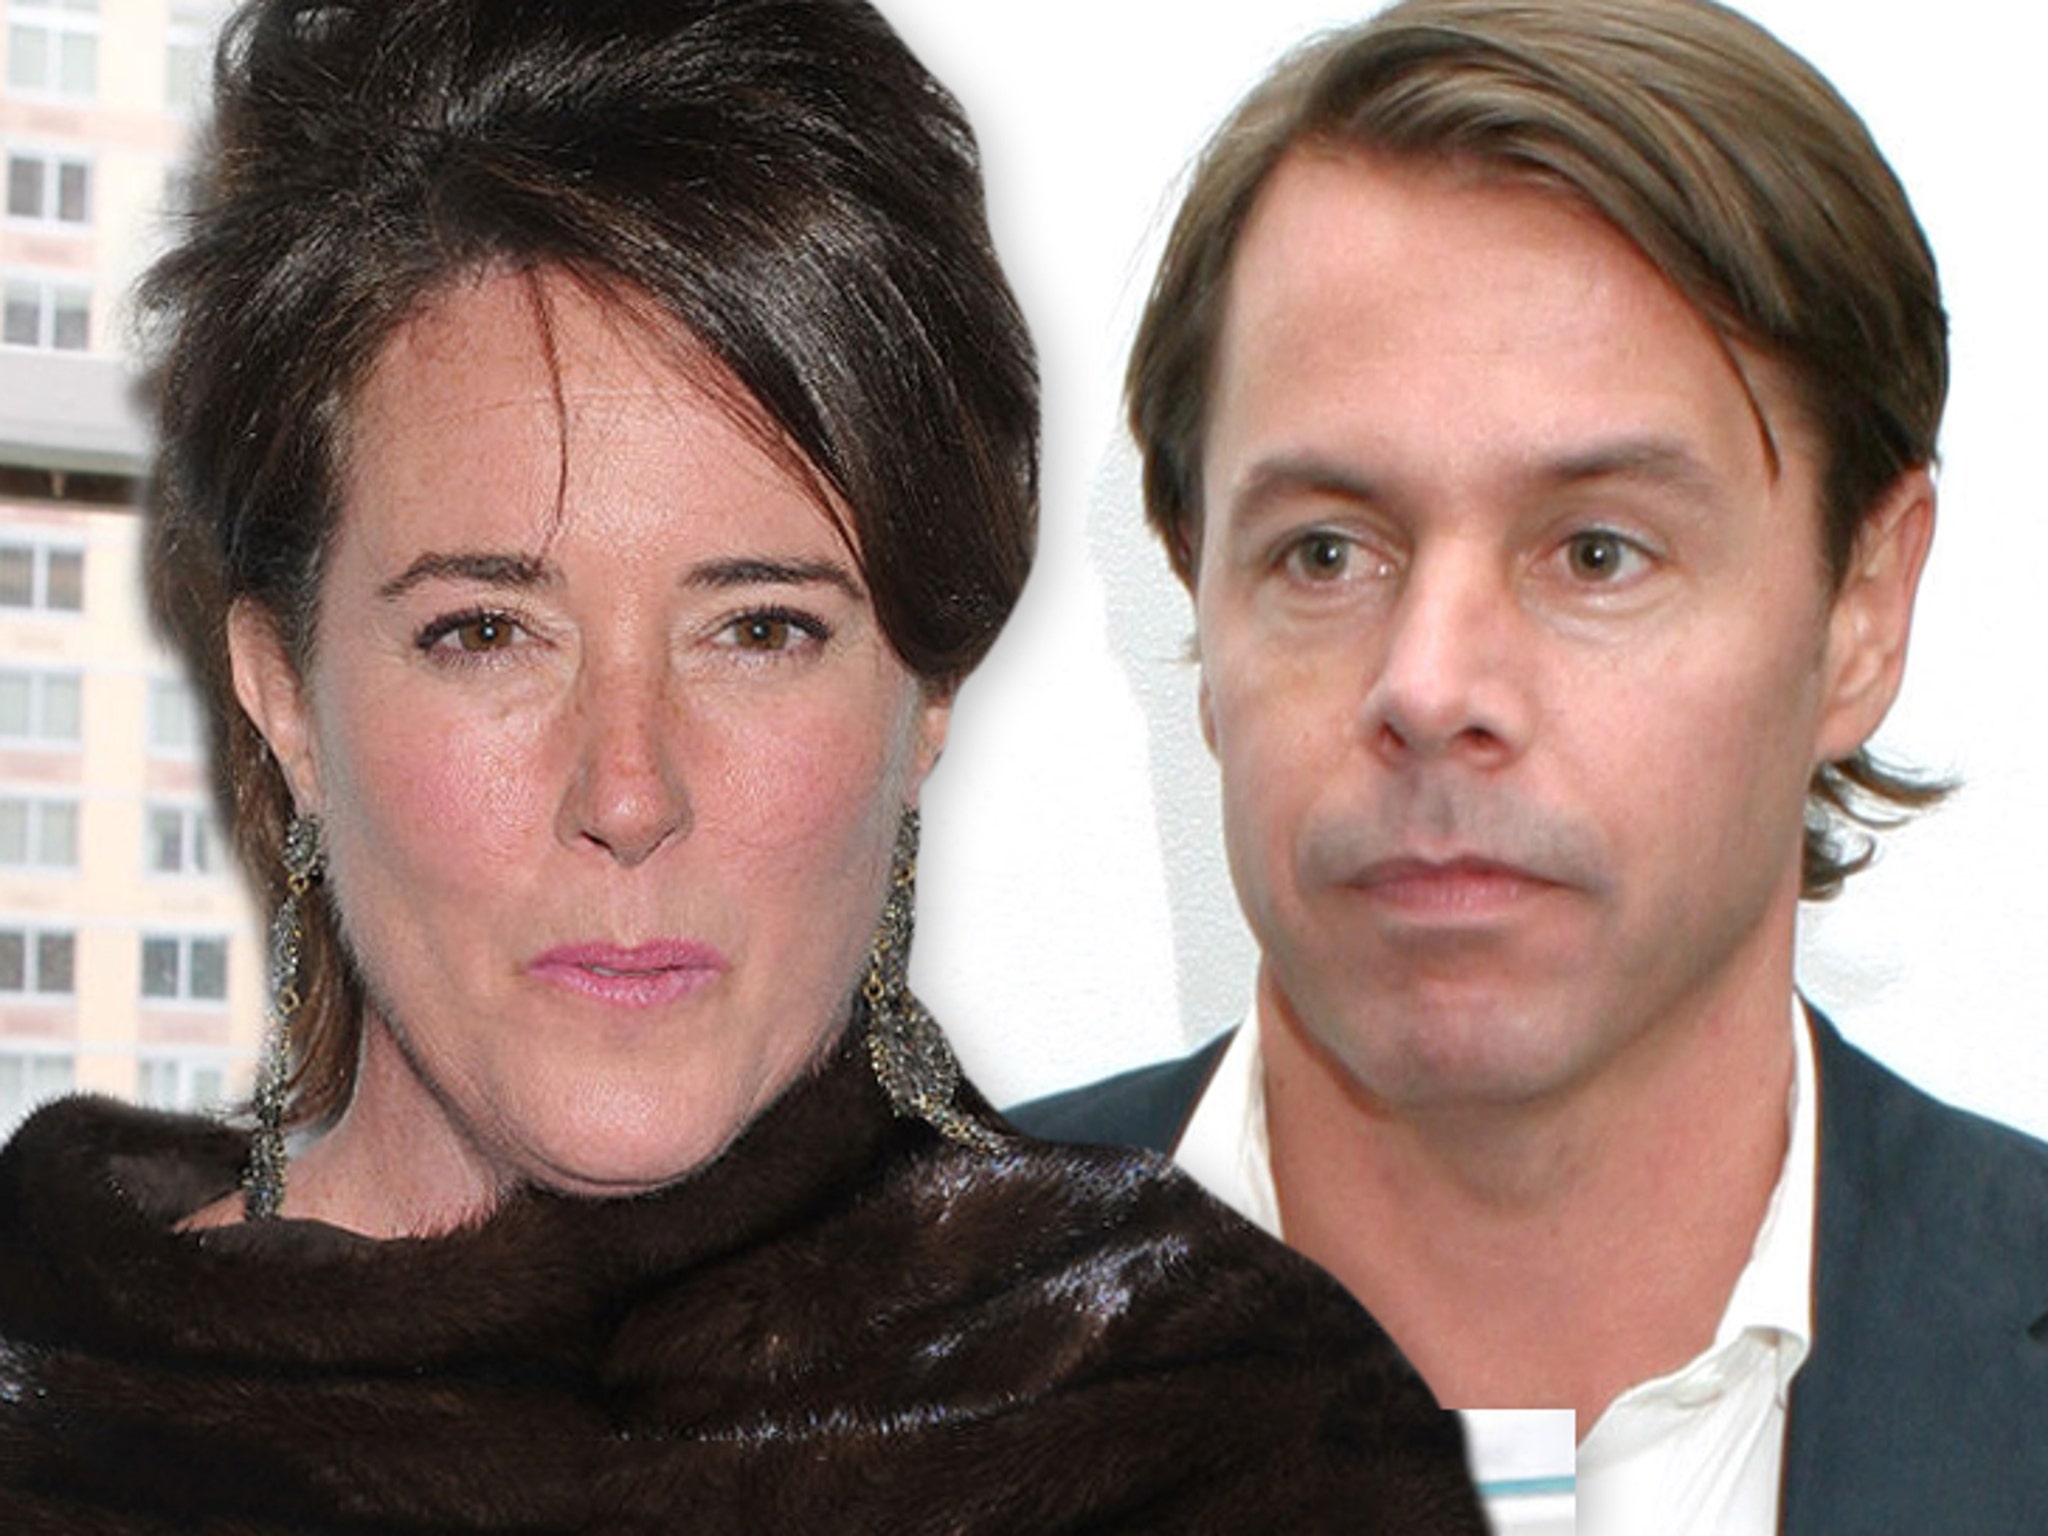 Kate Spade Depressed Before Suicide Because Husband Wanted a Divorce